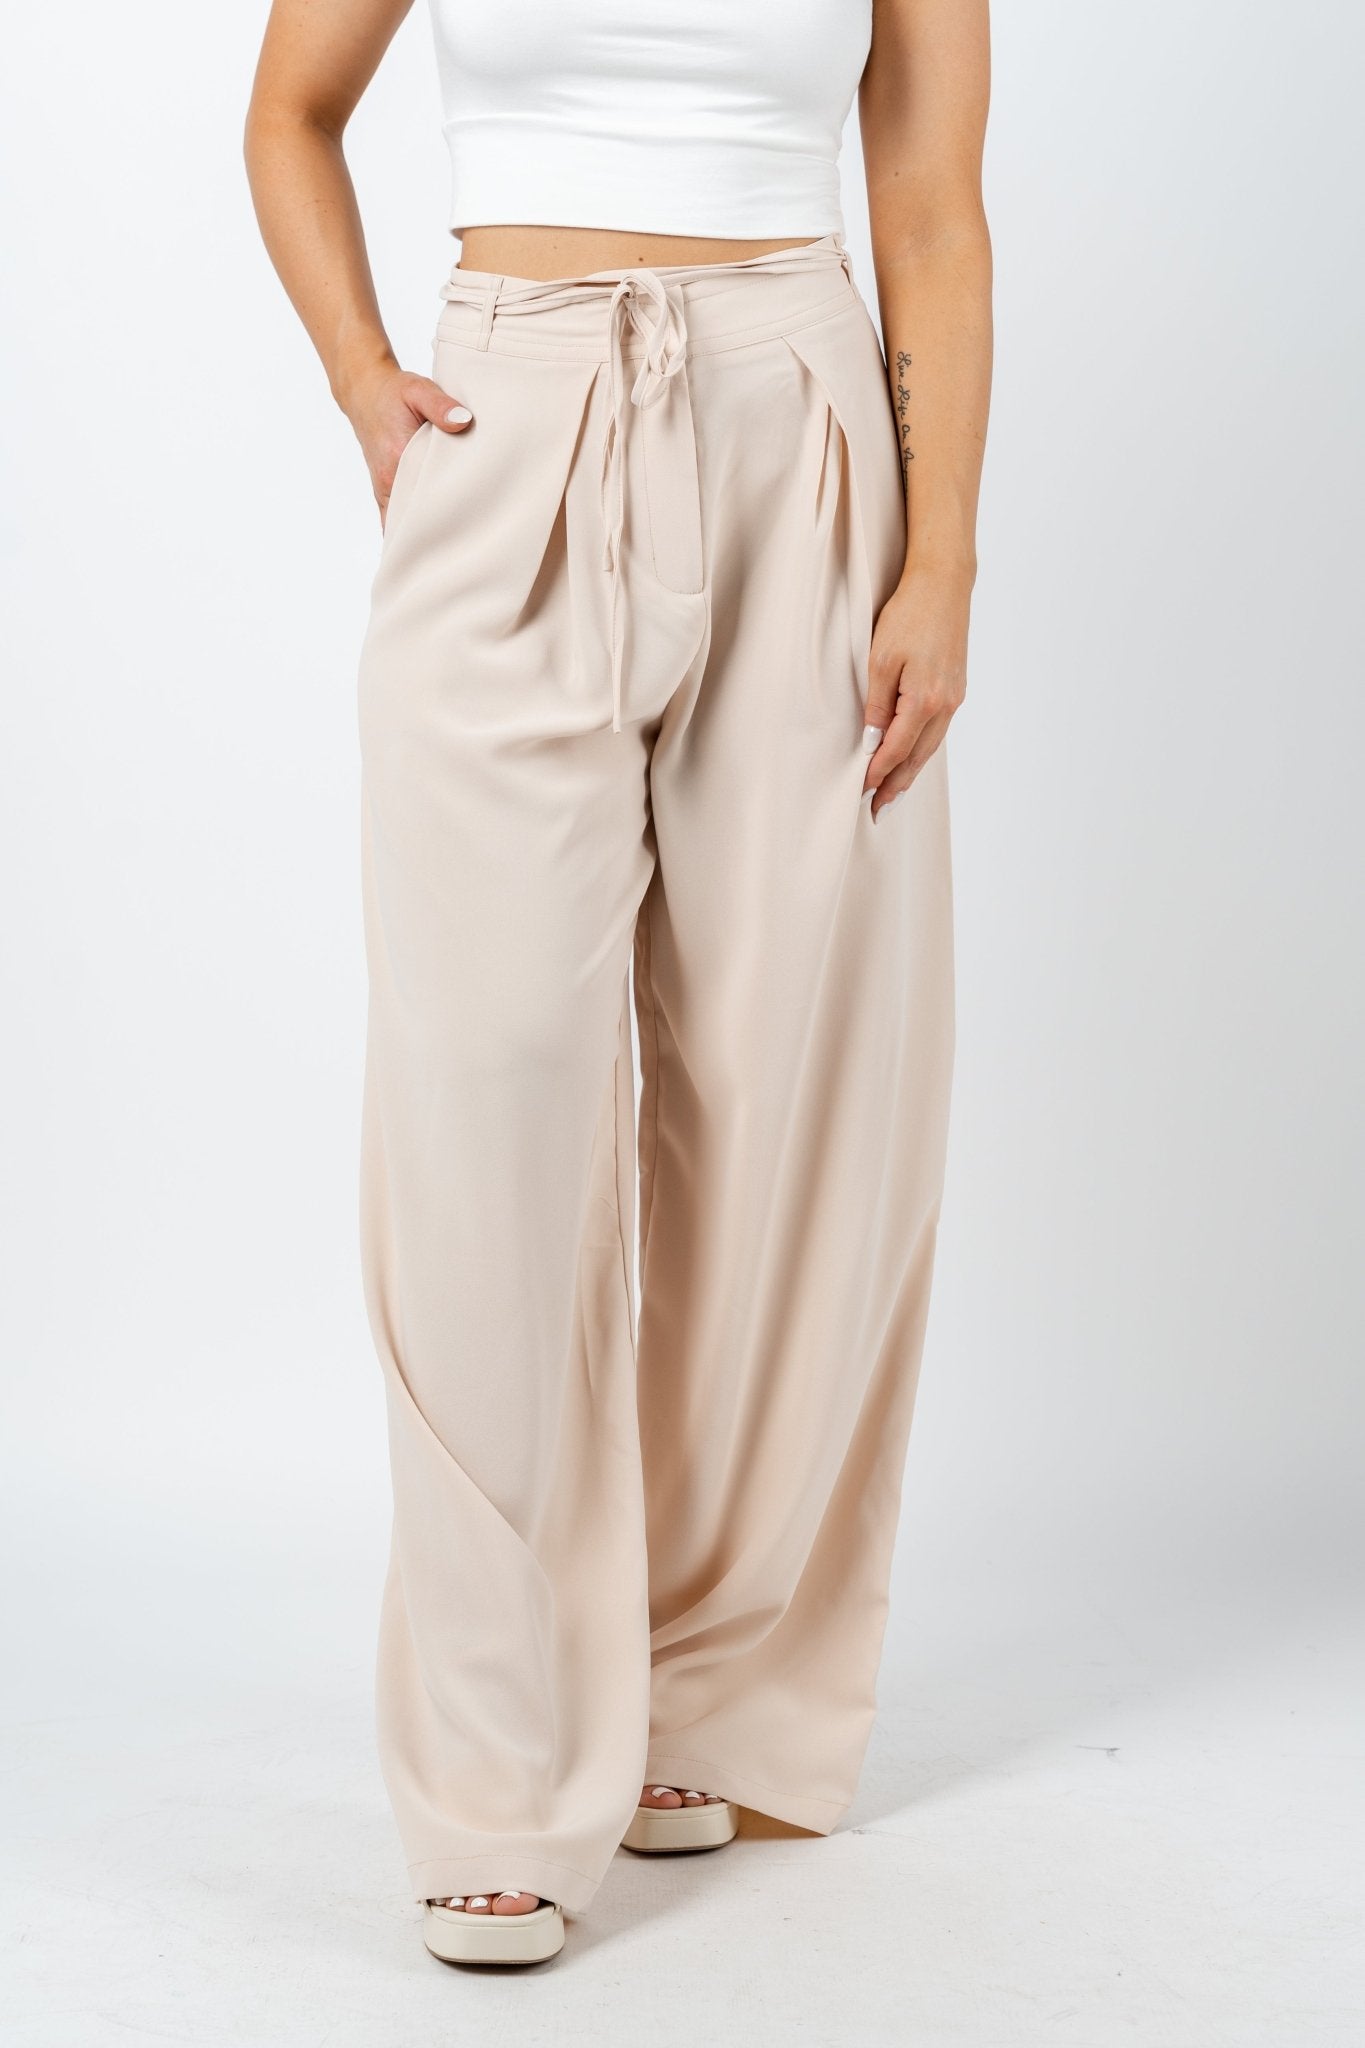 High waist wide leg pants natural - Trendy Pants - Cute Vacation Collection at Lush Fashion Lounge Boutique in Oklahoma City